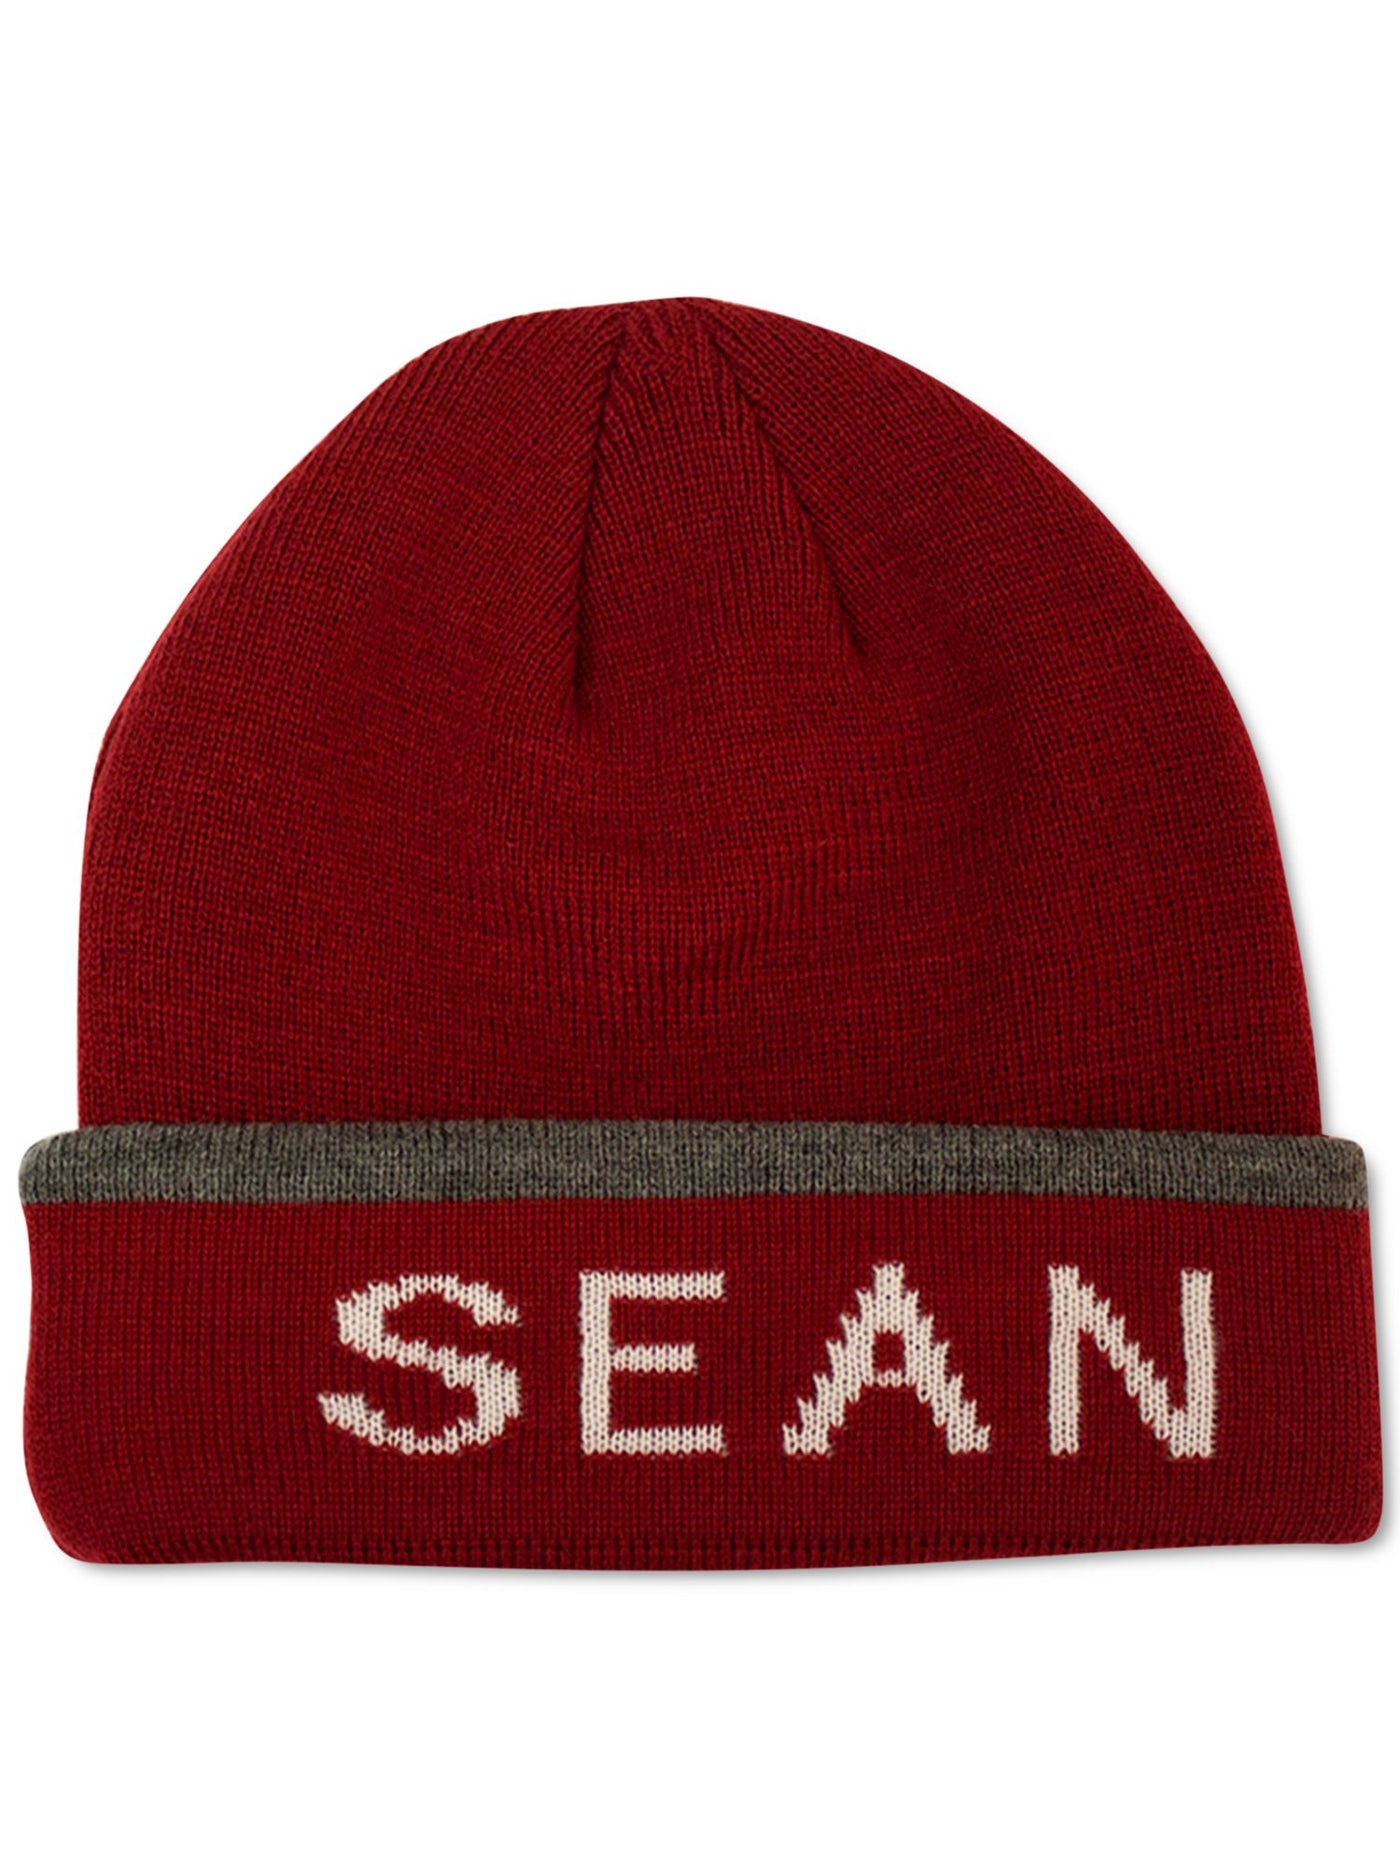 SEANJOHN Mens Red Logo Acrylic Fitted Winter Beanie Hat Cap